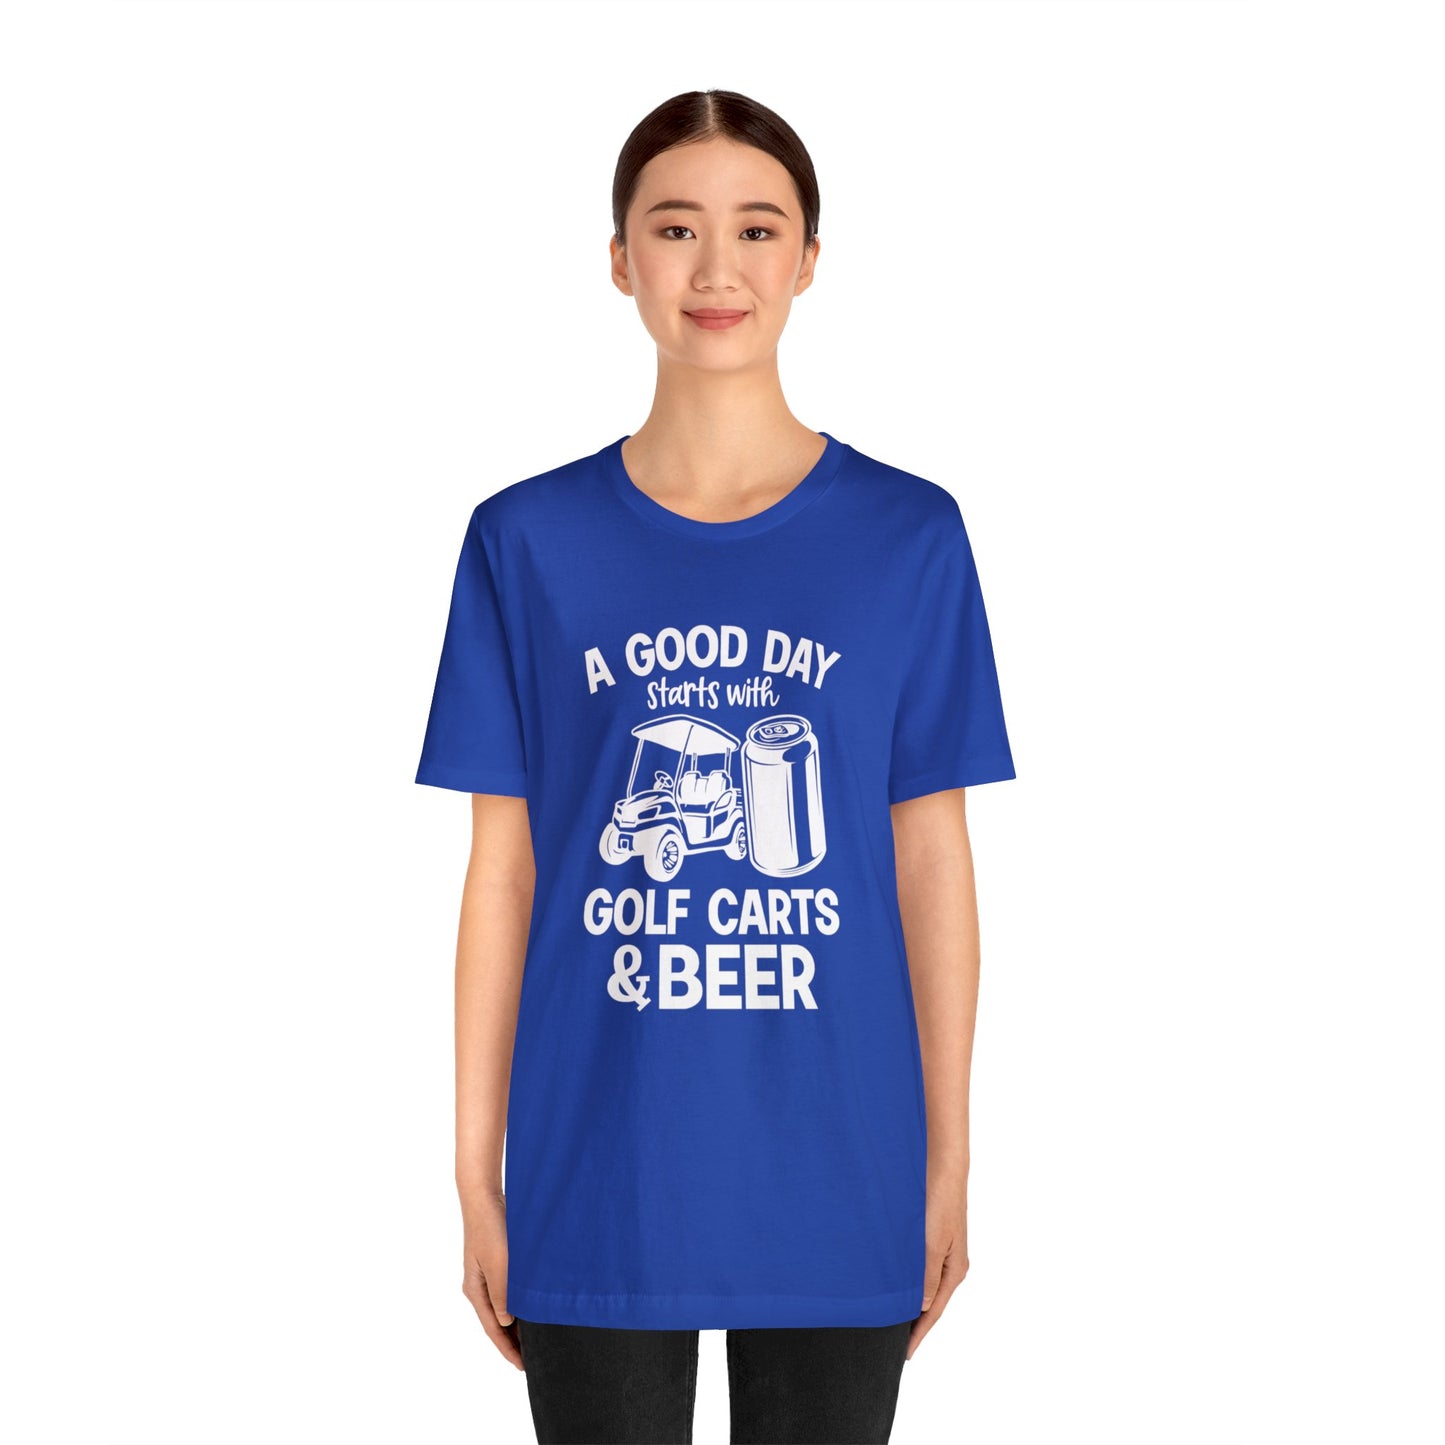 A Good Day Starts With Golf Carts And Beer T-Shirt - Short Sleeve Tee